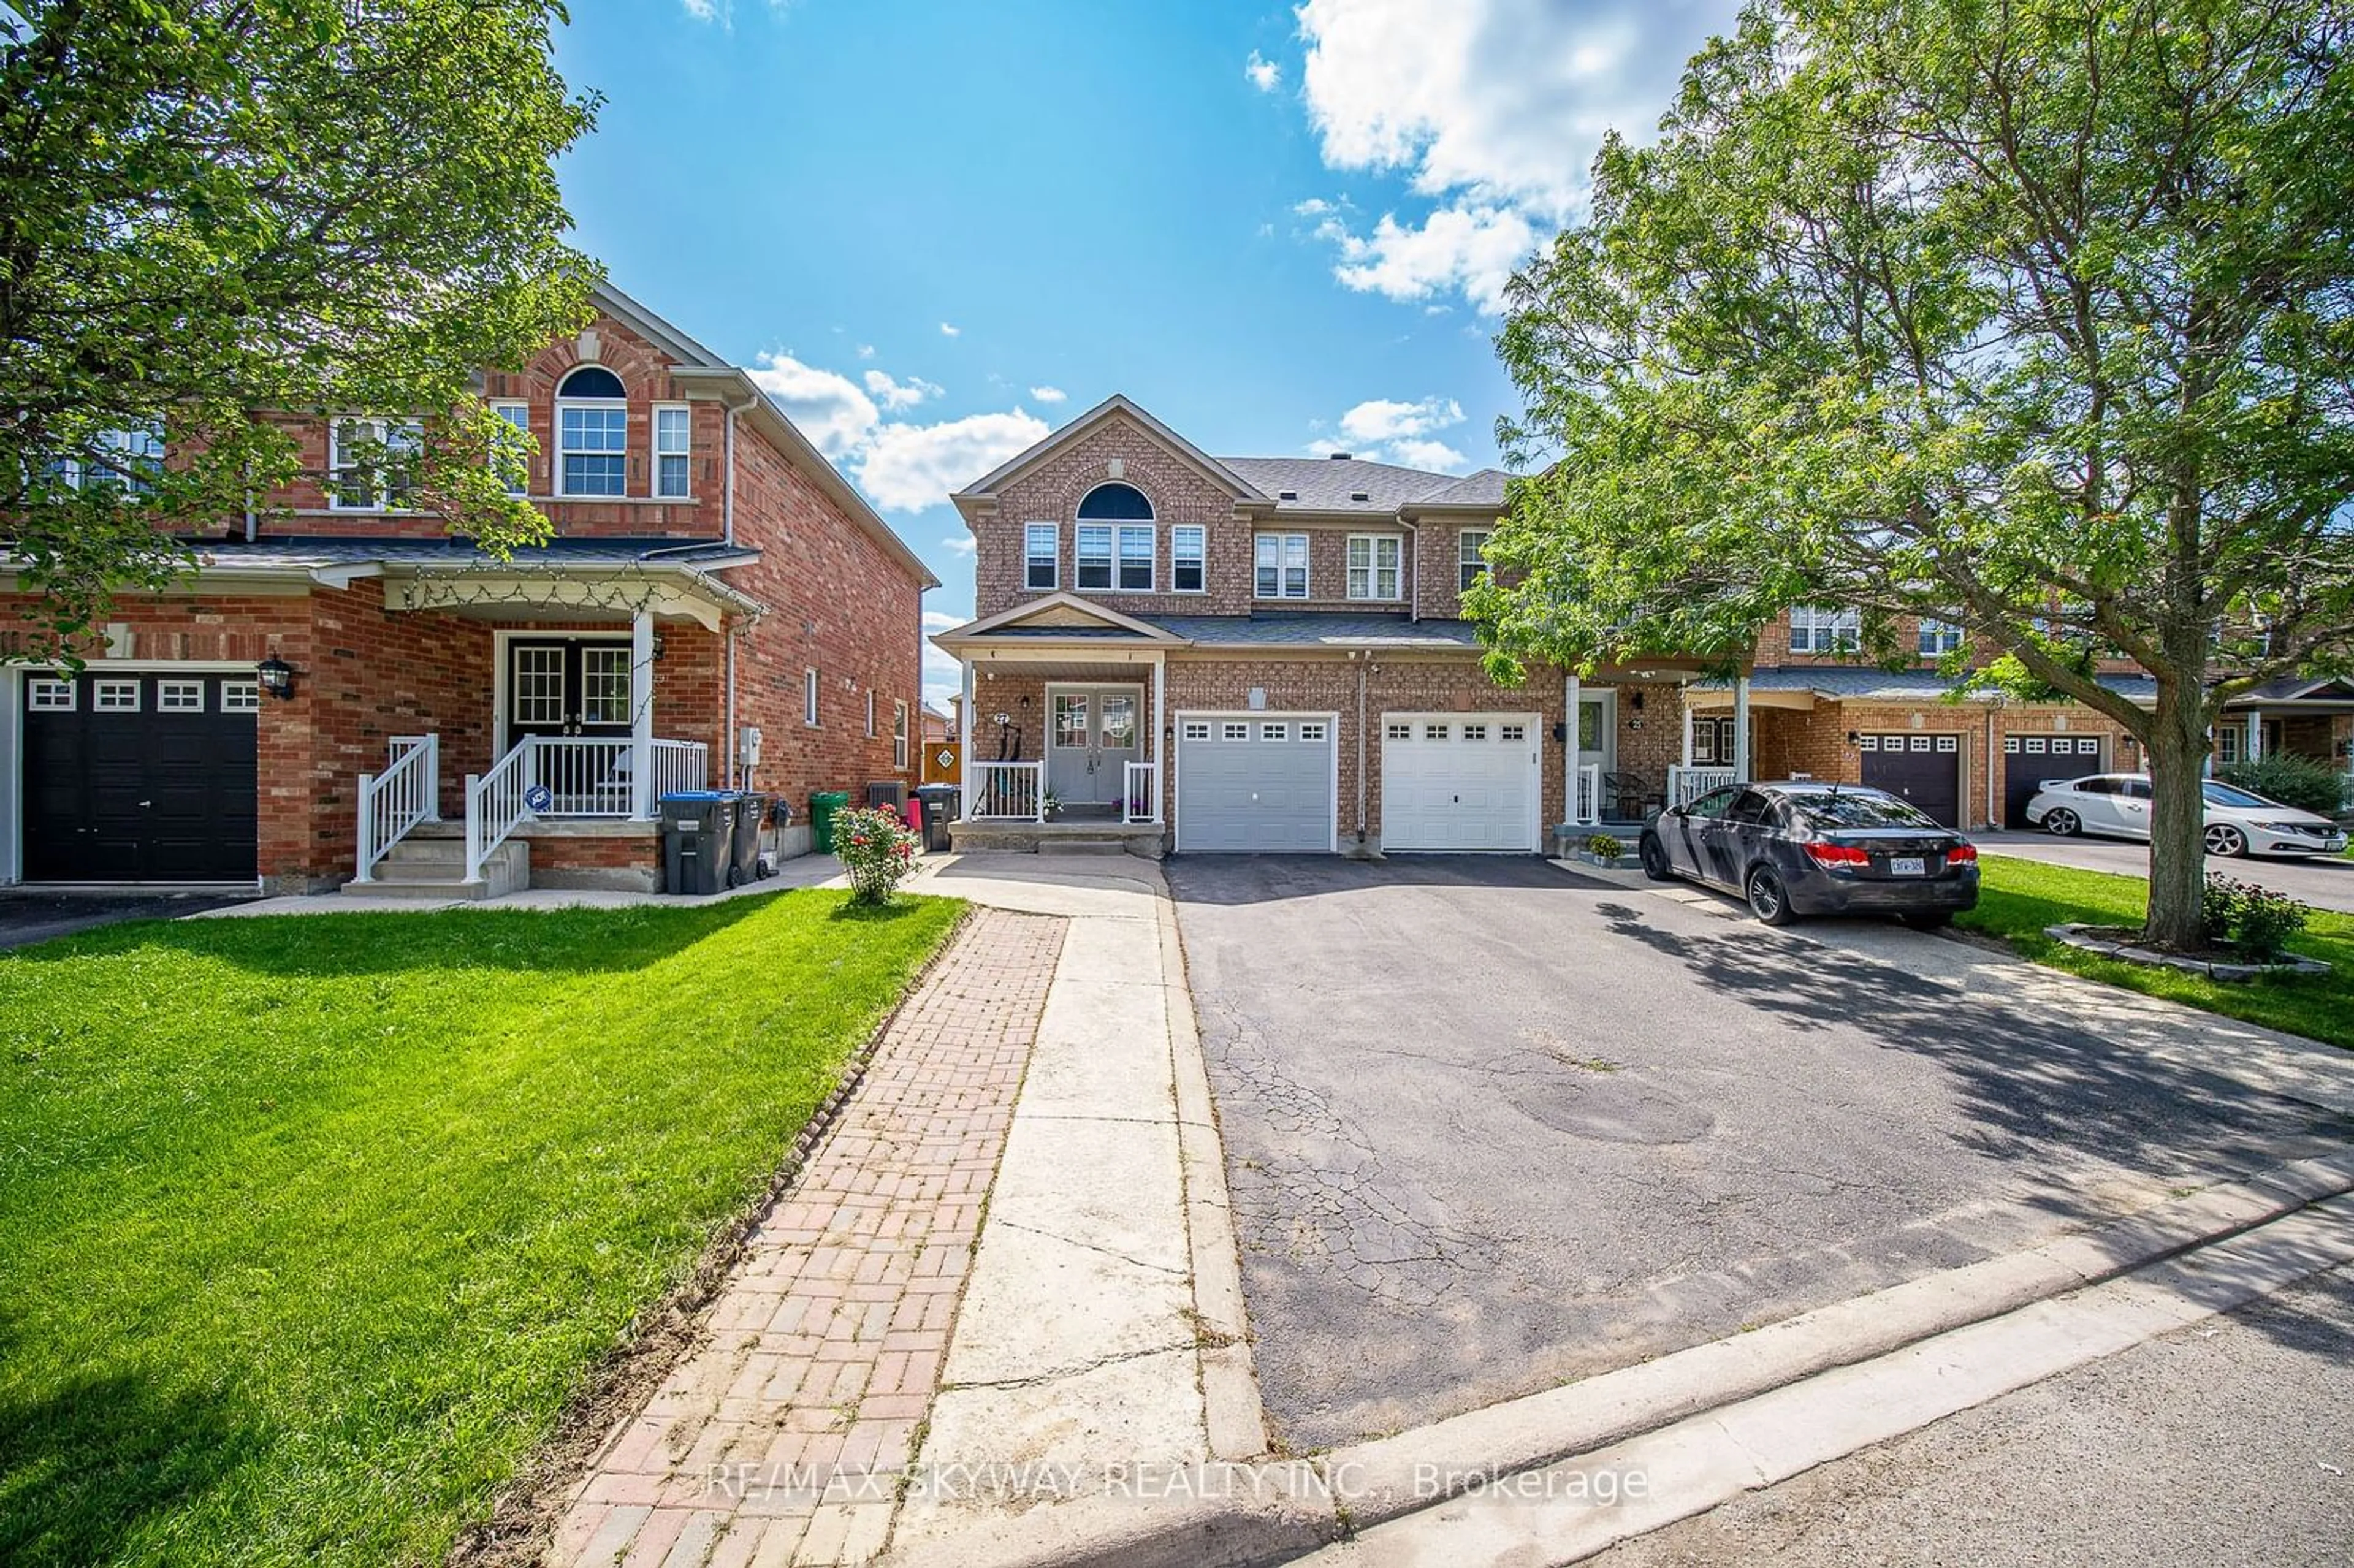 Home with brick exterior material for 27 Briarcroft Rd, Brampton Ontario L7A 1X6